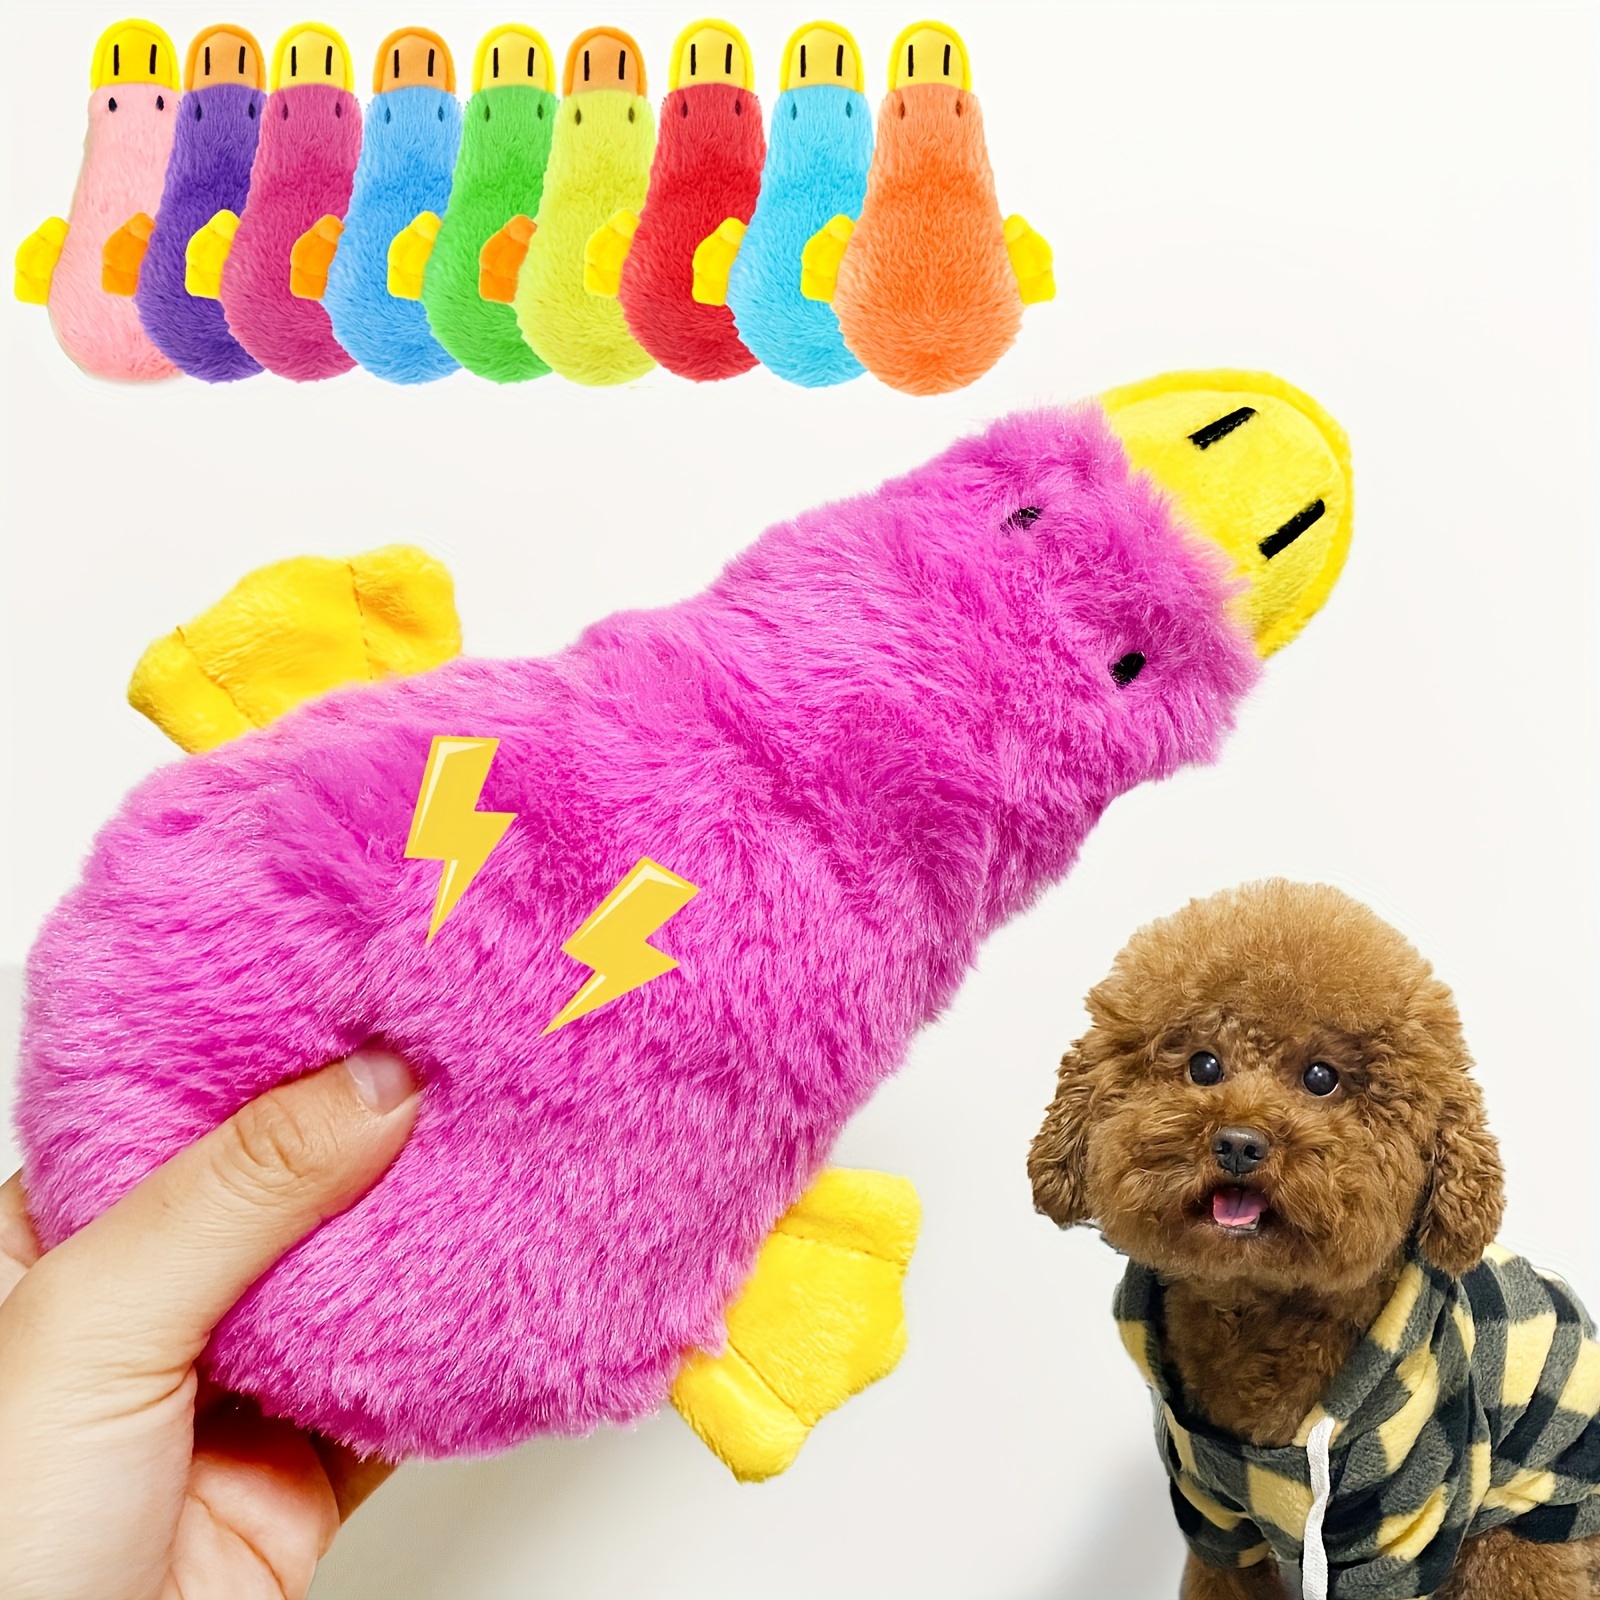 

Interactive Dog Plush Toy With Squeaker - Perfect Chew Toy For Small And Medium Dogs - Ideal Pet Birthday Gift